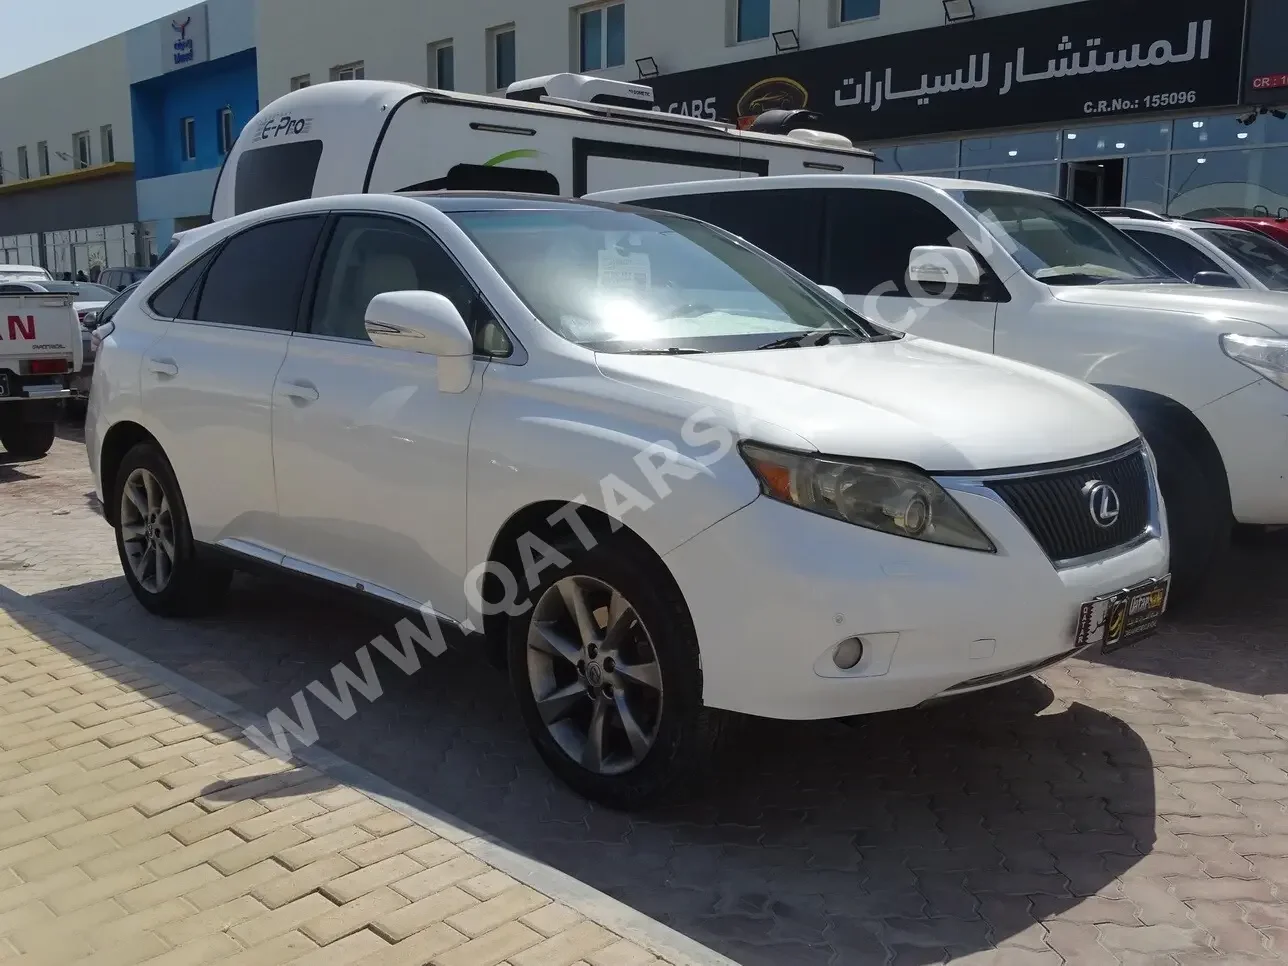 Lexus  RX  350  2010  Automatic  403,000 Km  6 Cylinder  Four Wheel Drive (4WD)  SUV  White